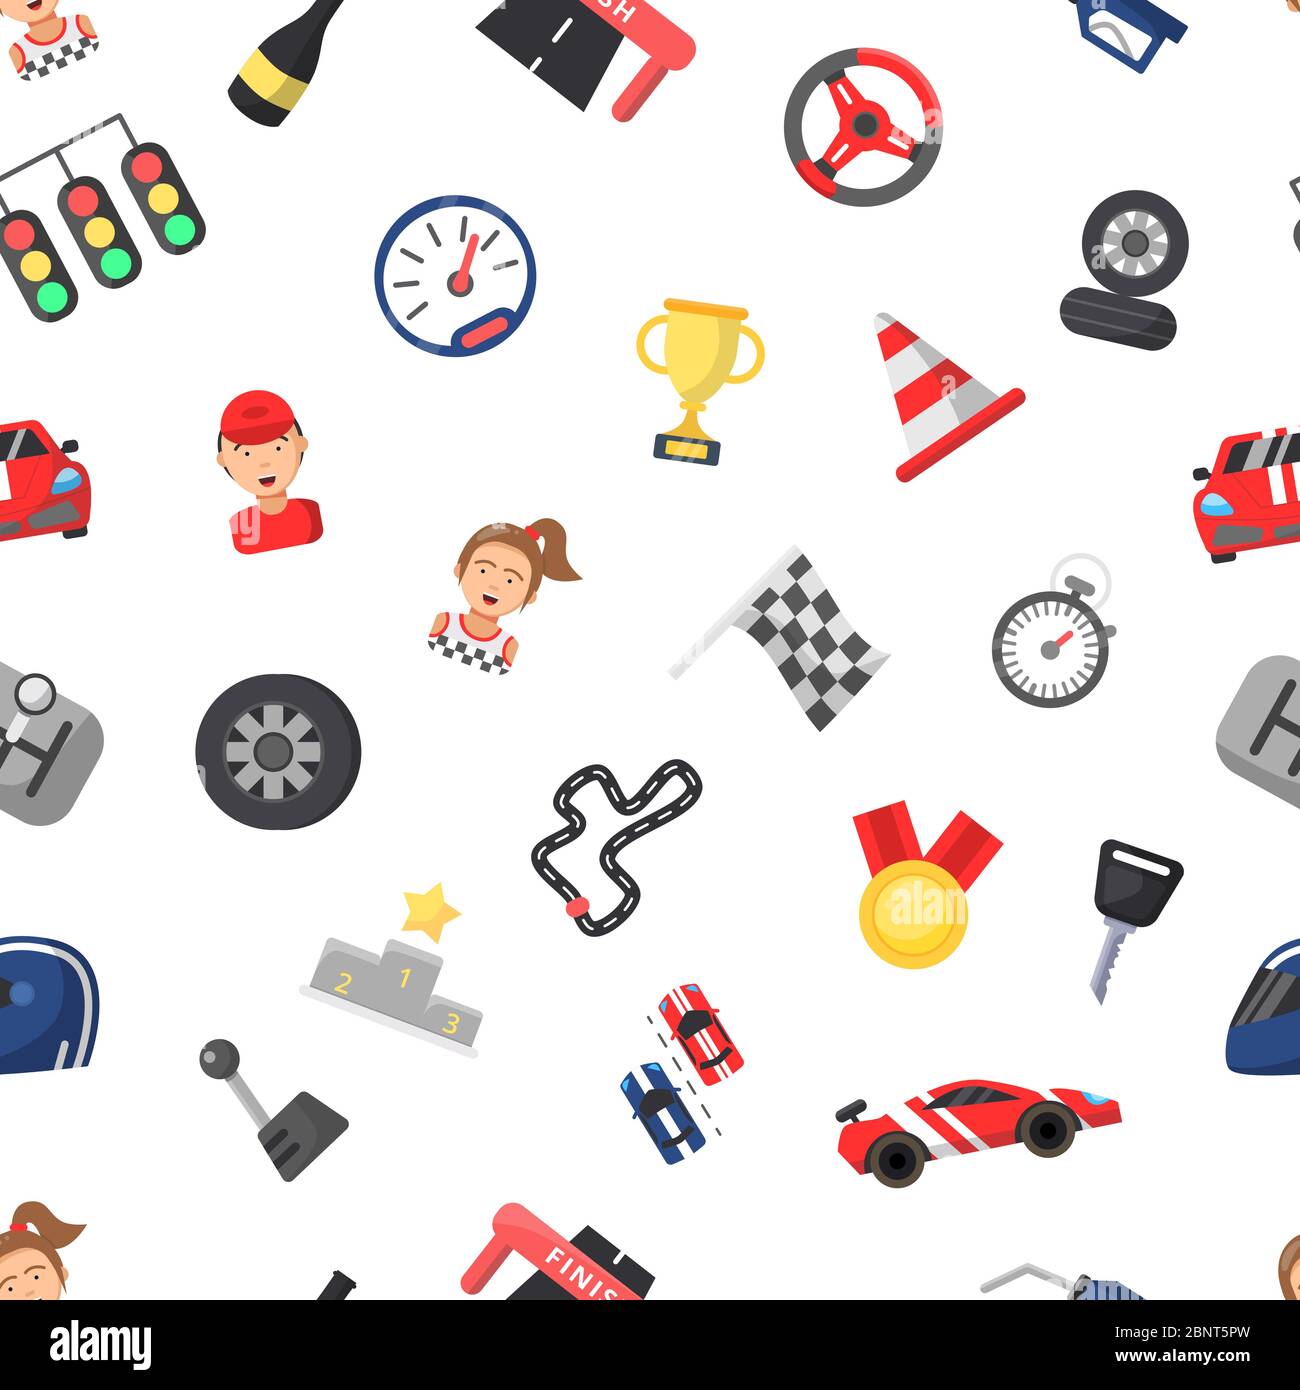 Vector flat car racing icons pattern or background illustration Stock Vector